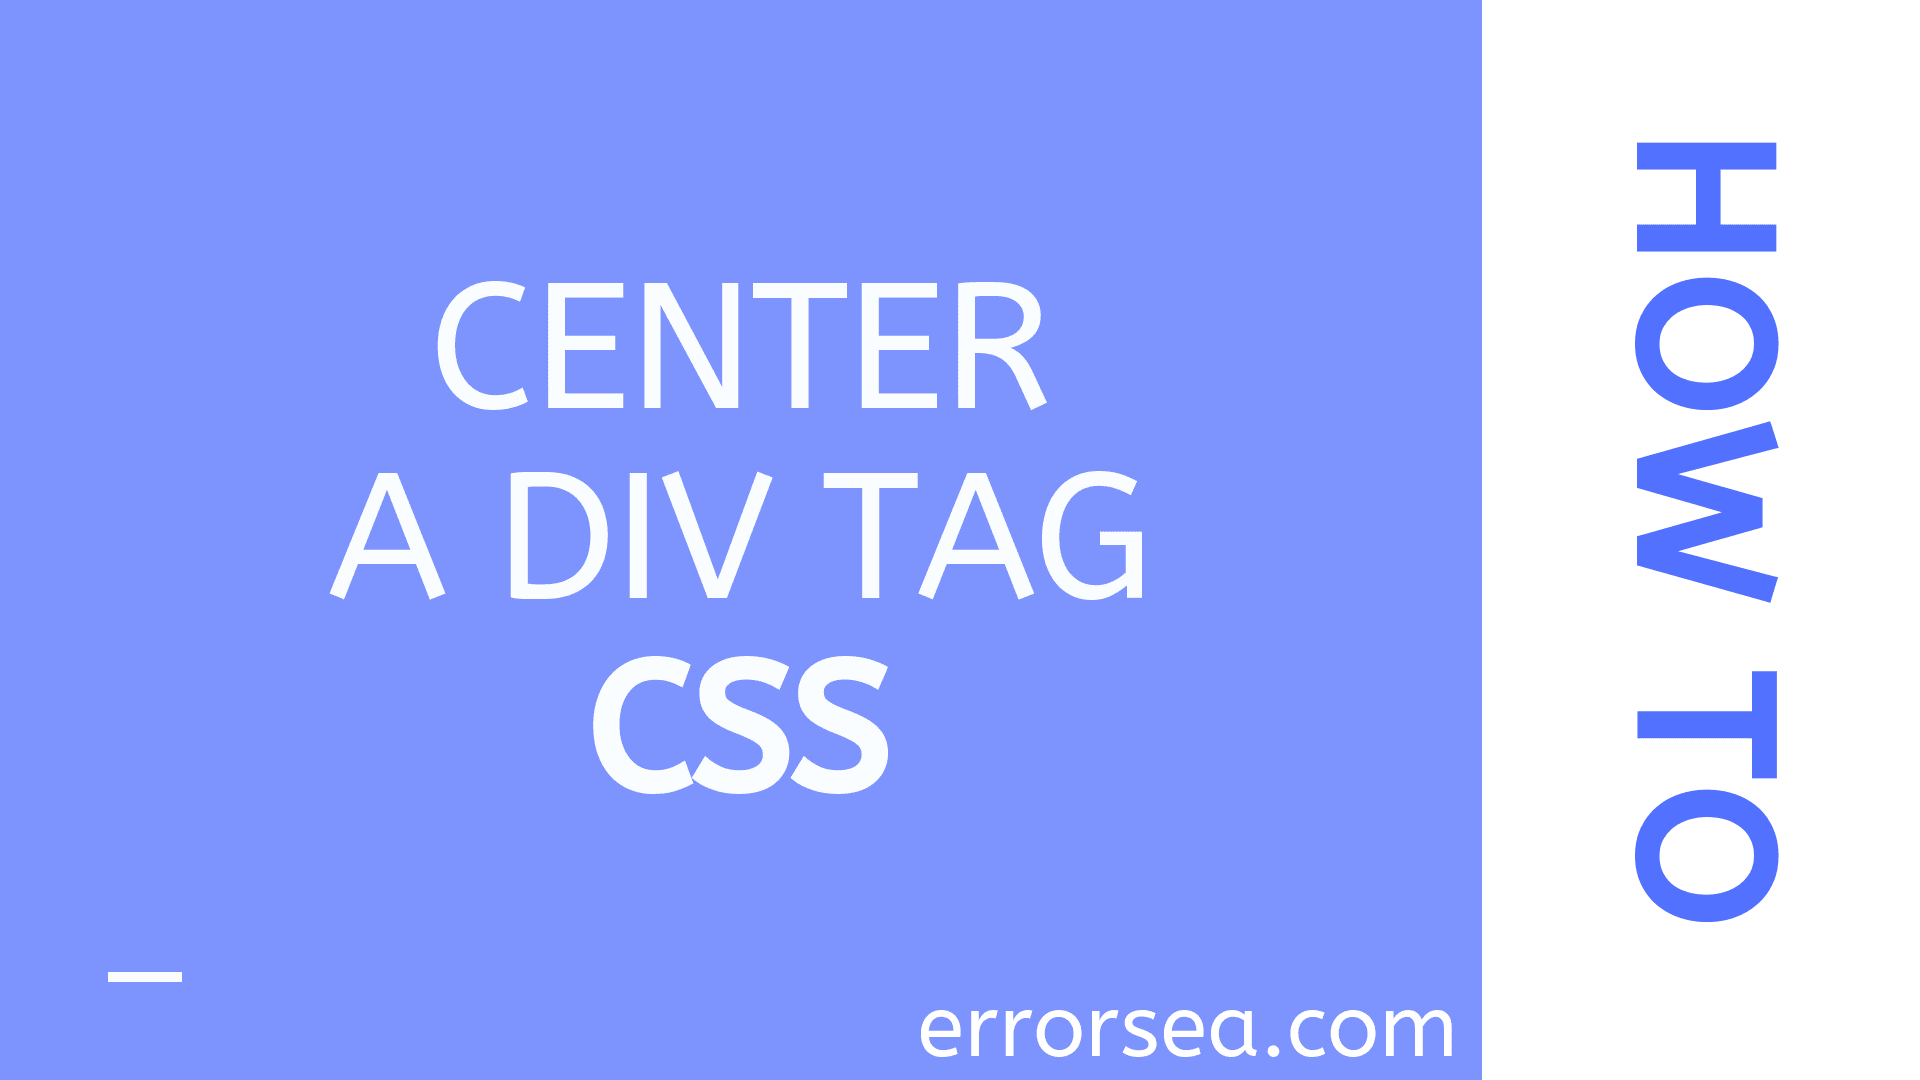 How to Center a Div Tag With CSS